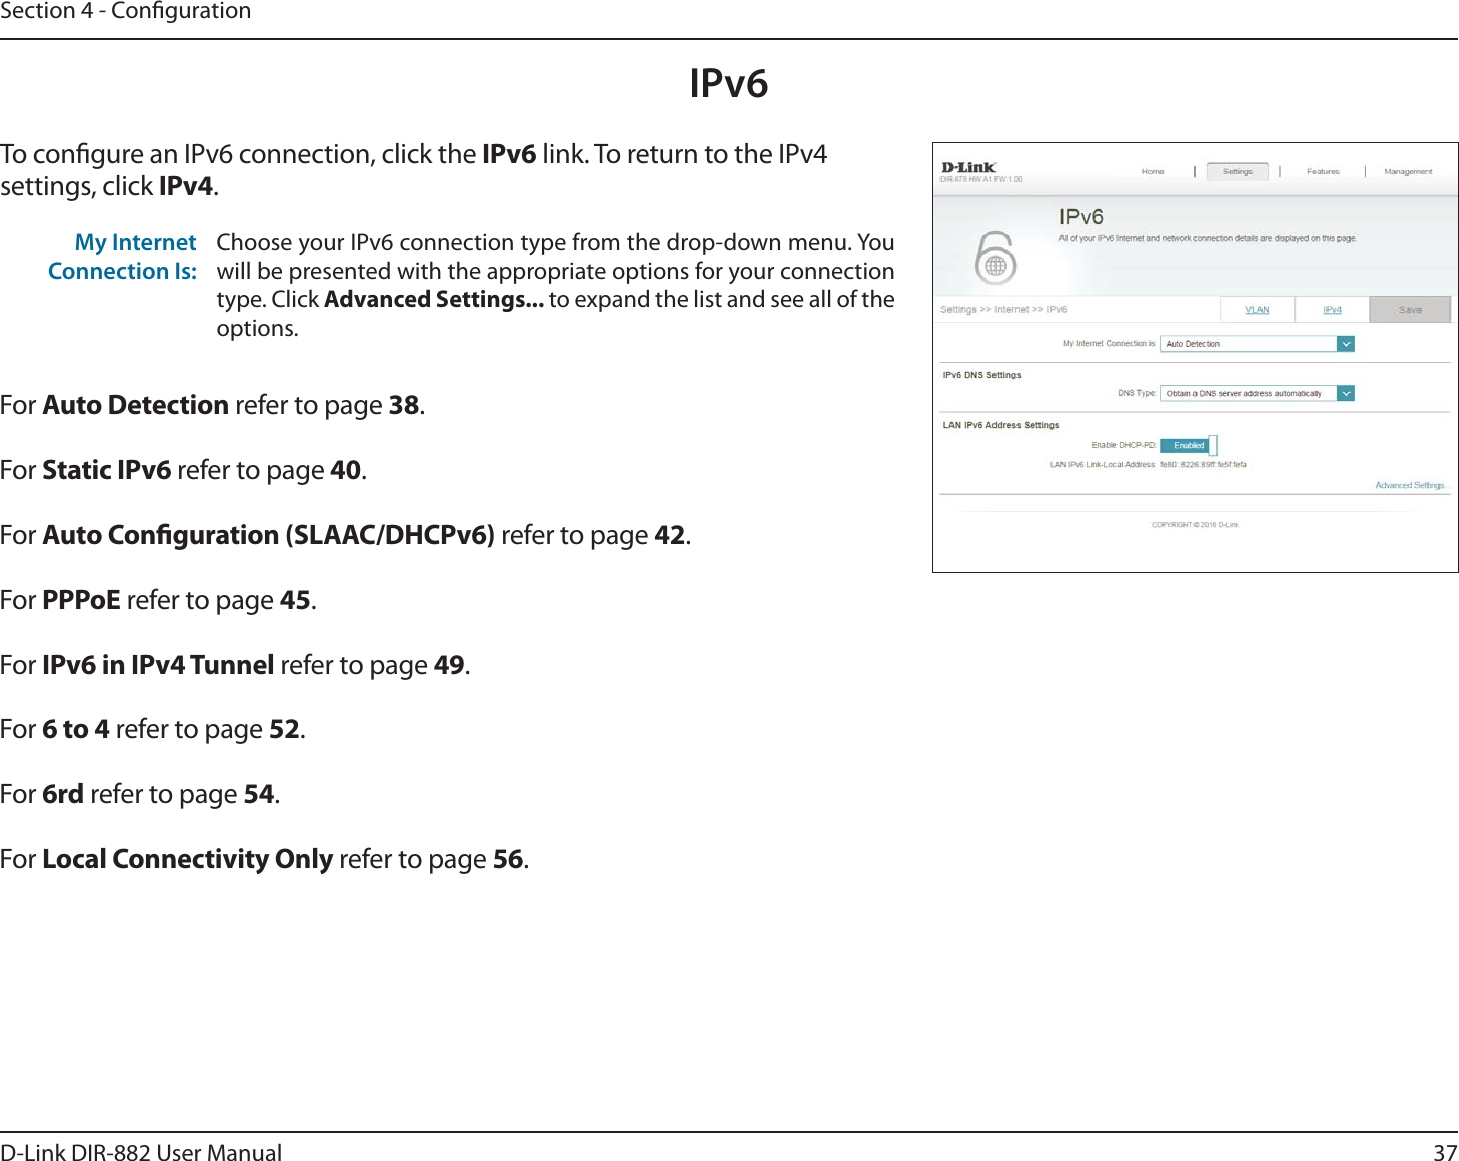 37D-Link DIR-882 User ManualSection 4 - CongurationIPv6To congure an IPv6 connection, click the IPv6 link. To return to the IPv4 settings, click IPv4.For &quot;VUP%FUFDUJPO refer to page 38.For Static IPv6 refer to page 40.For &quot;VUP$POöHVSBUJPO4-&quot;&quot;$%)$1W refer to page 42.For 111P&amp; refer to page 45.For IPv6 in IPv4 Tunnel refer to page 49.For 6 to 4 refer to page 52.For 6rd refer to page 54.For -PDBM$POOFDUJWJUZ0OMZ refer to page 56.My Internet Connection Is:Choose your IPv6 connection type from the drop-down menu. You will be presented with the appropriate options for your connection type. Click &quot;EWBODFE4FUUJOHT to expand the list and see all of the options.